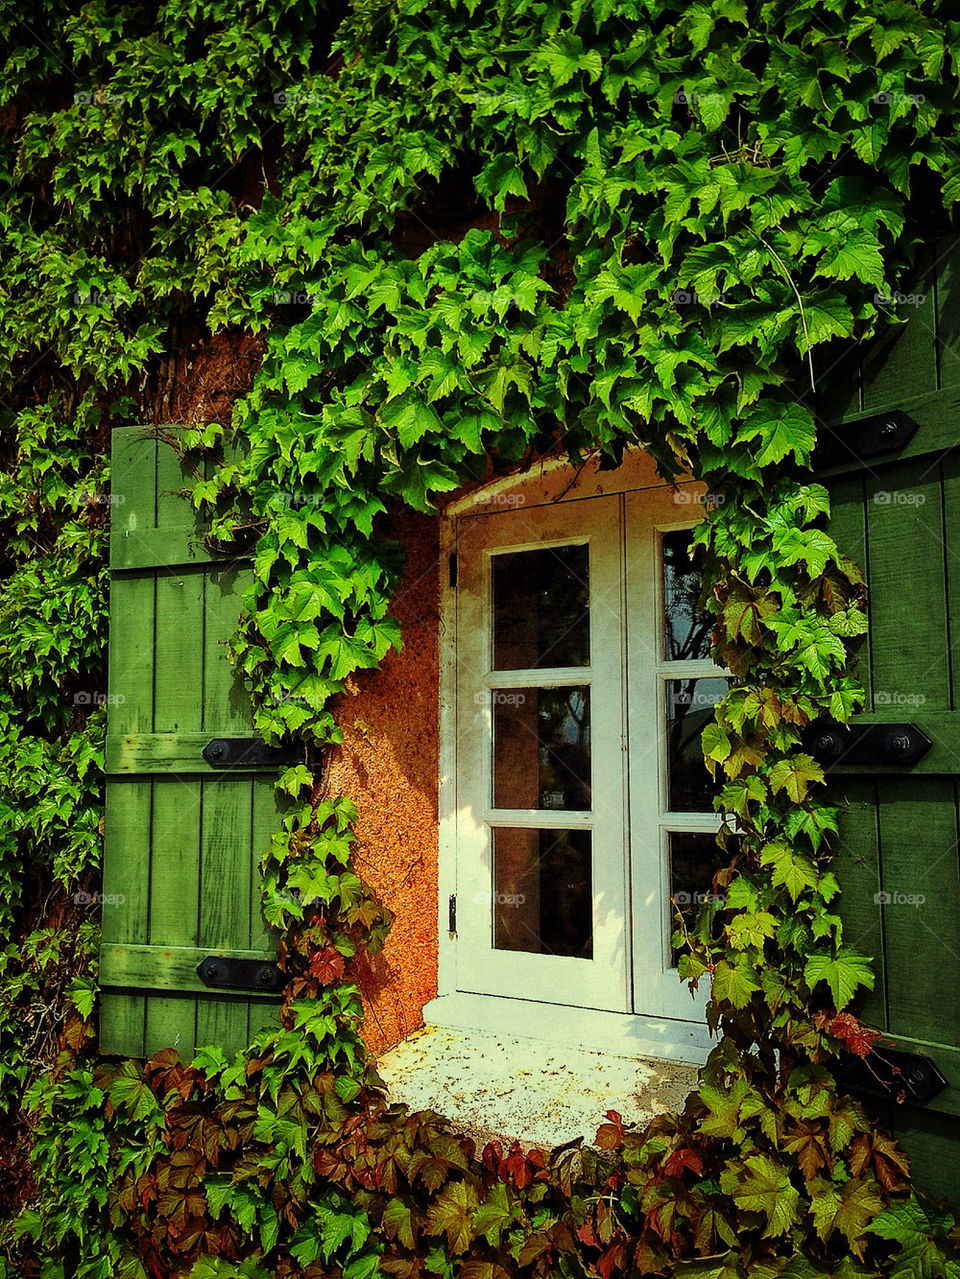 A Window in the Ivy